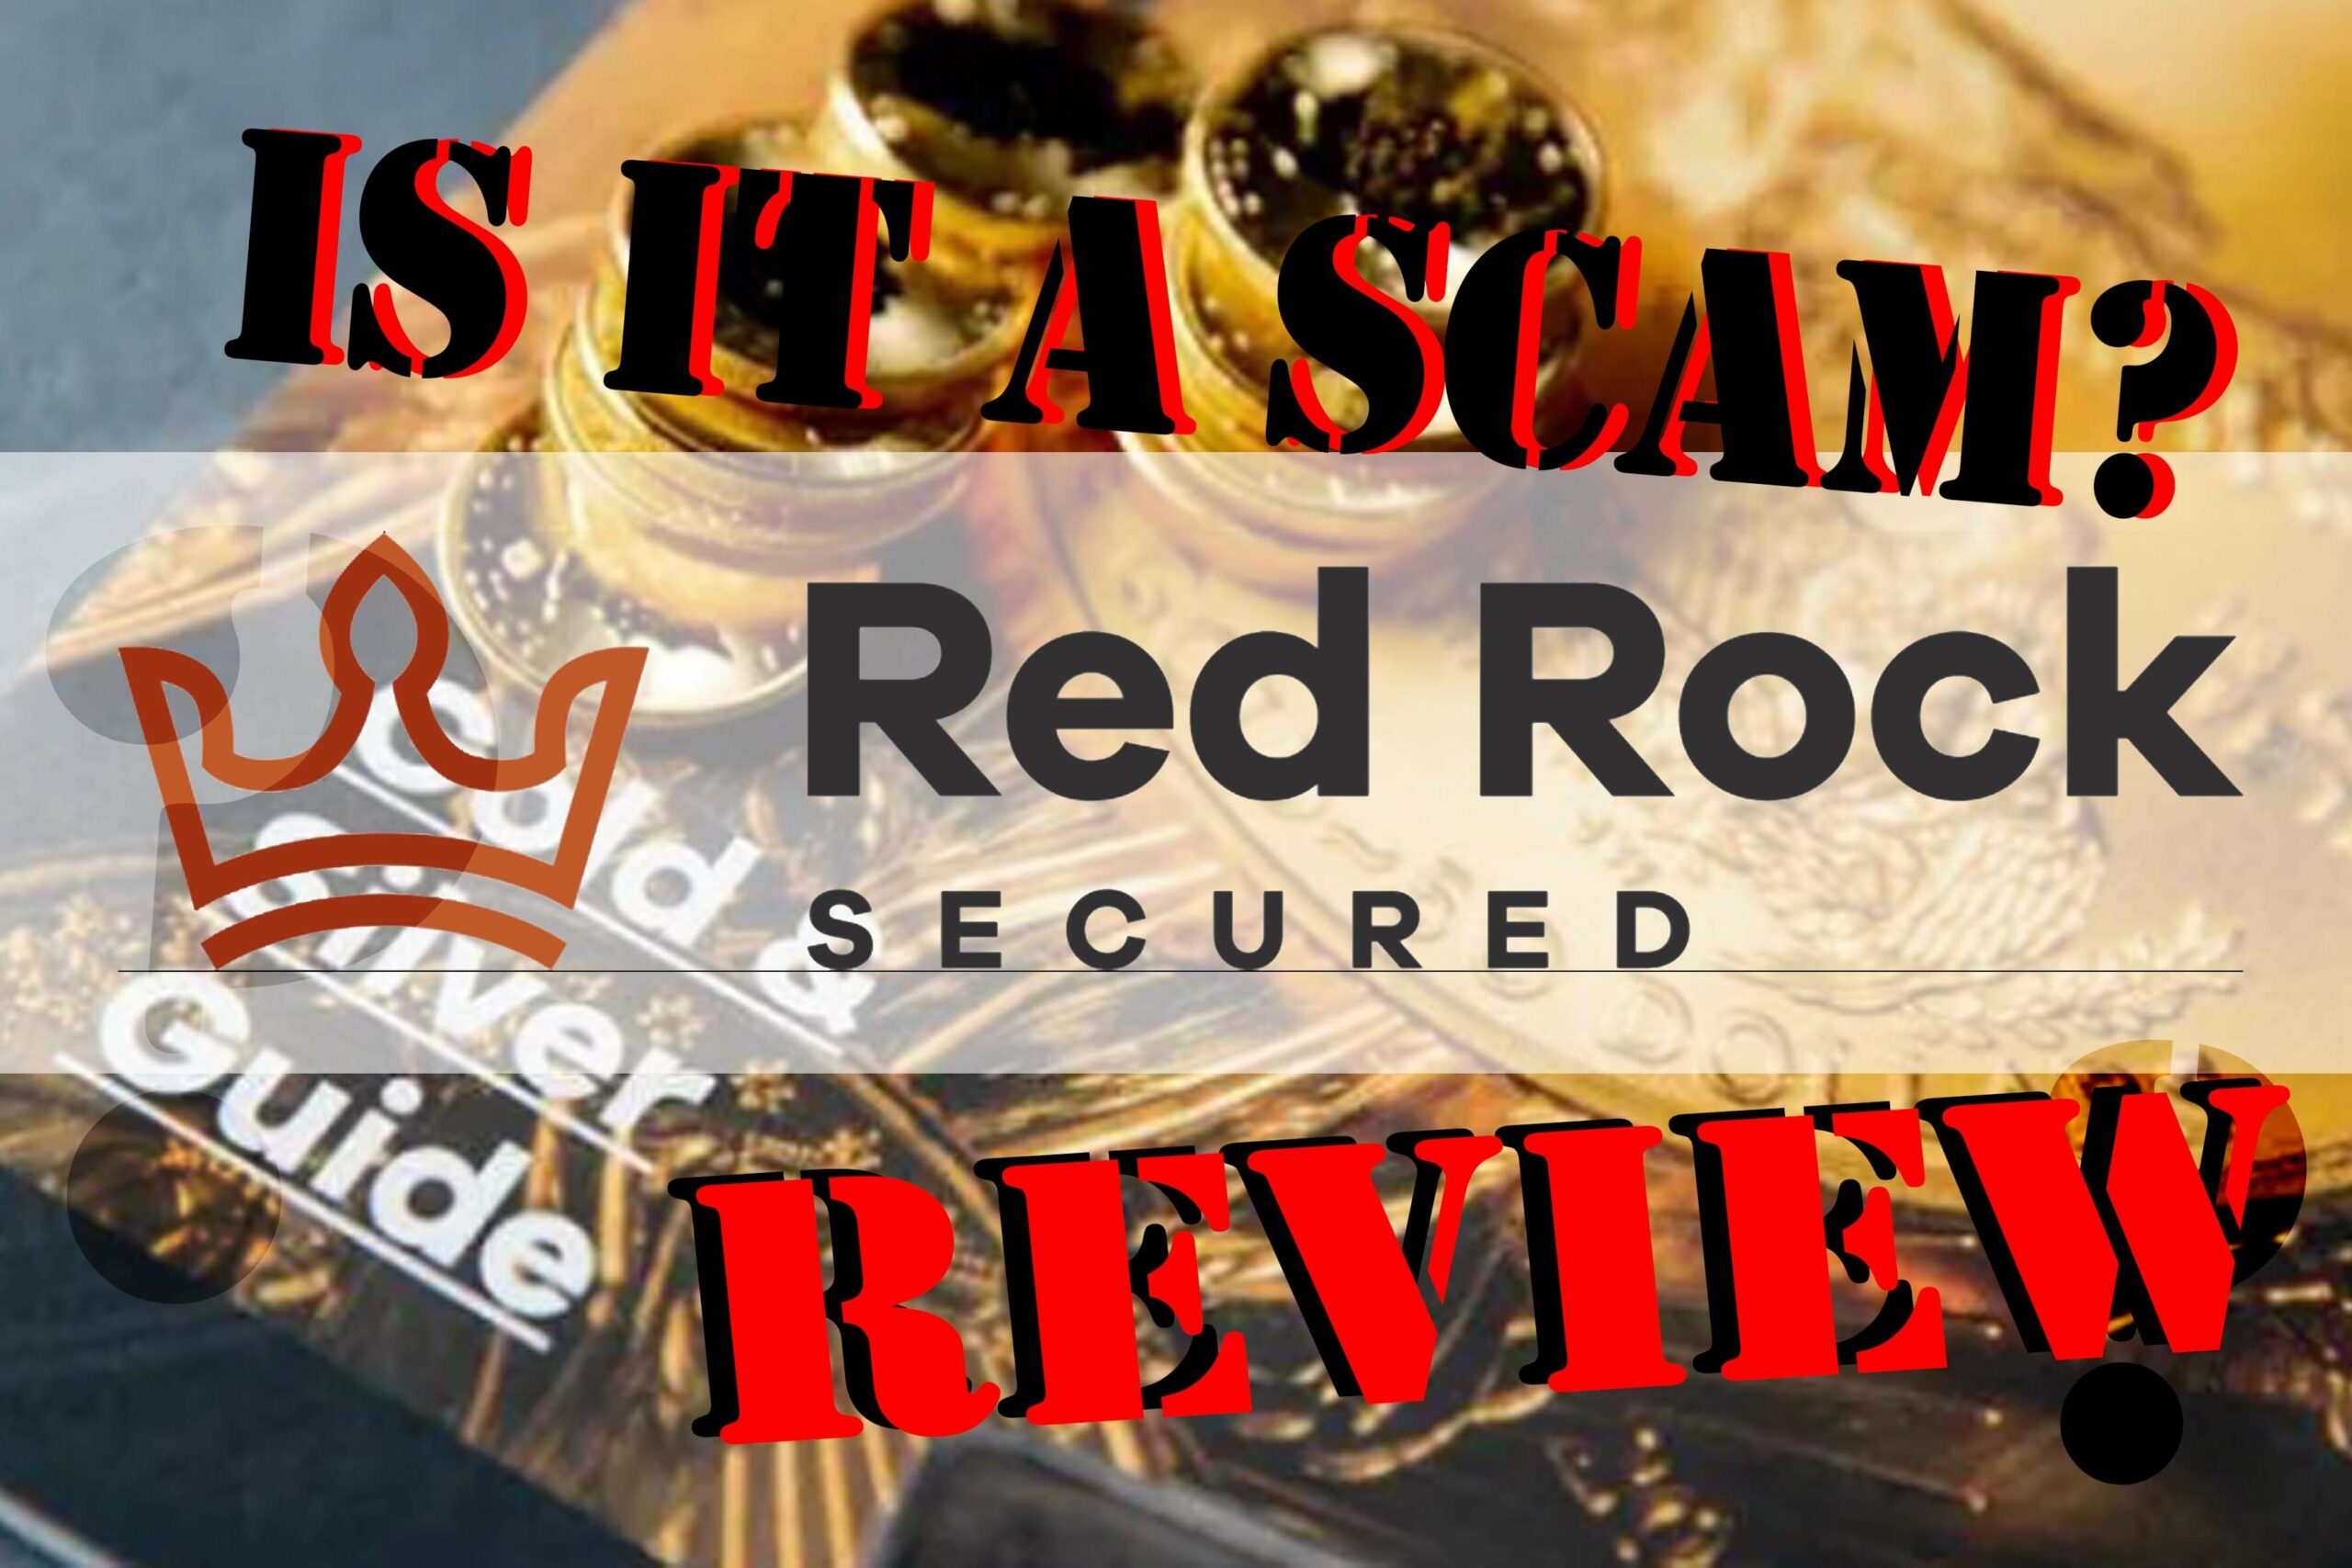 What is Red Rock Secured?